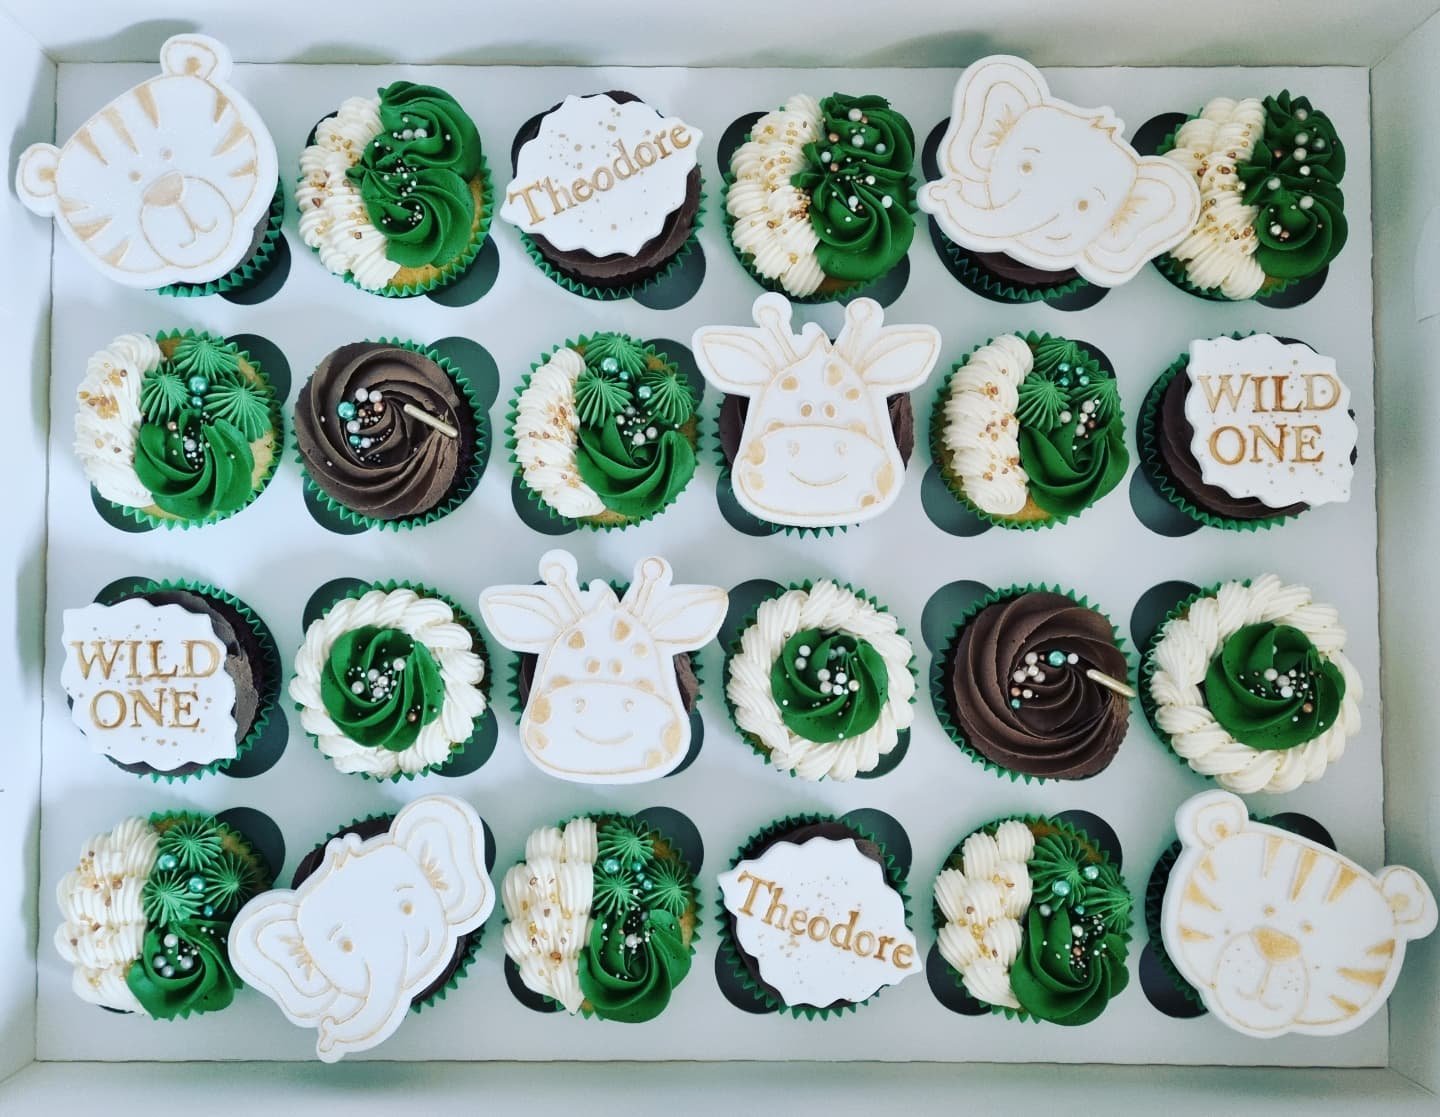 Wild One Cupcakes for Theodore